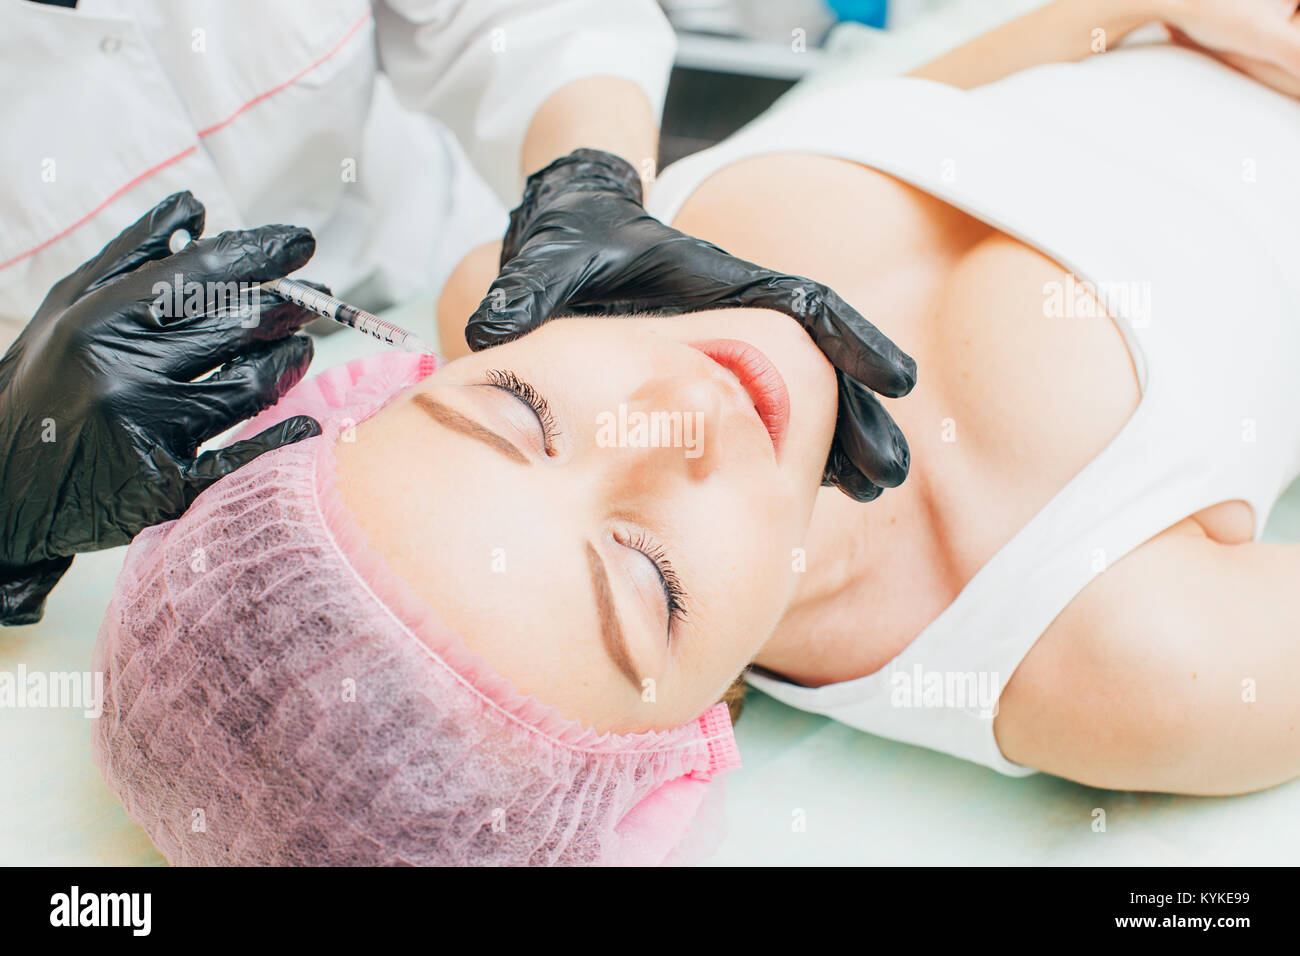 Cosmetic Treatment. Closeup Beautician Hands Doing Facial Skin Lifting Injection To Woman's Face. Receiving Beauty Procedure Indoors. High Resolution Stock Photo